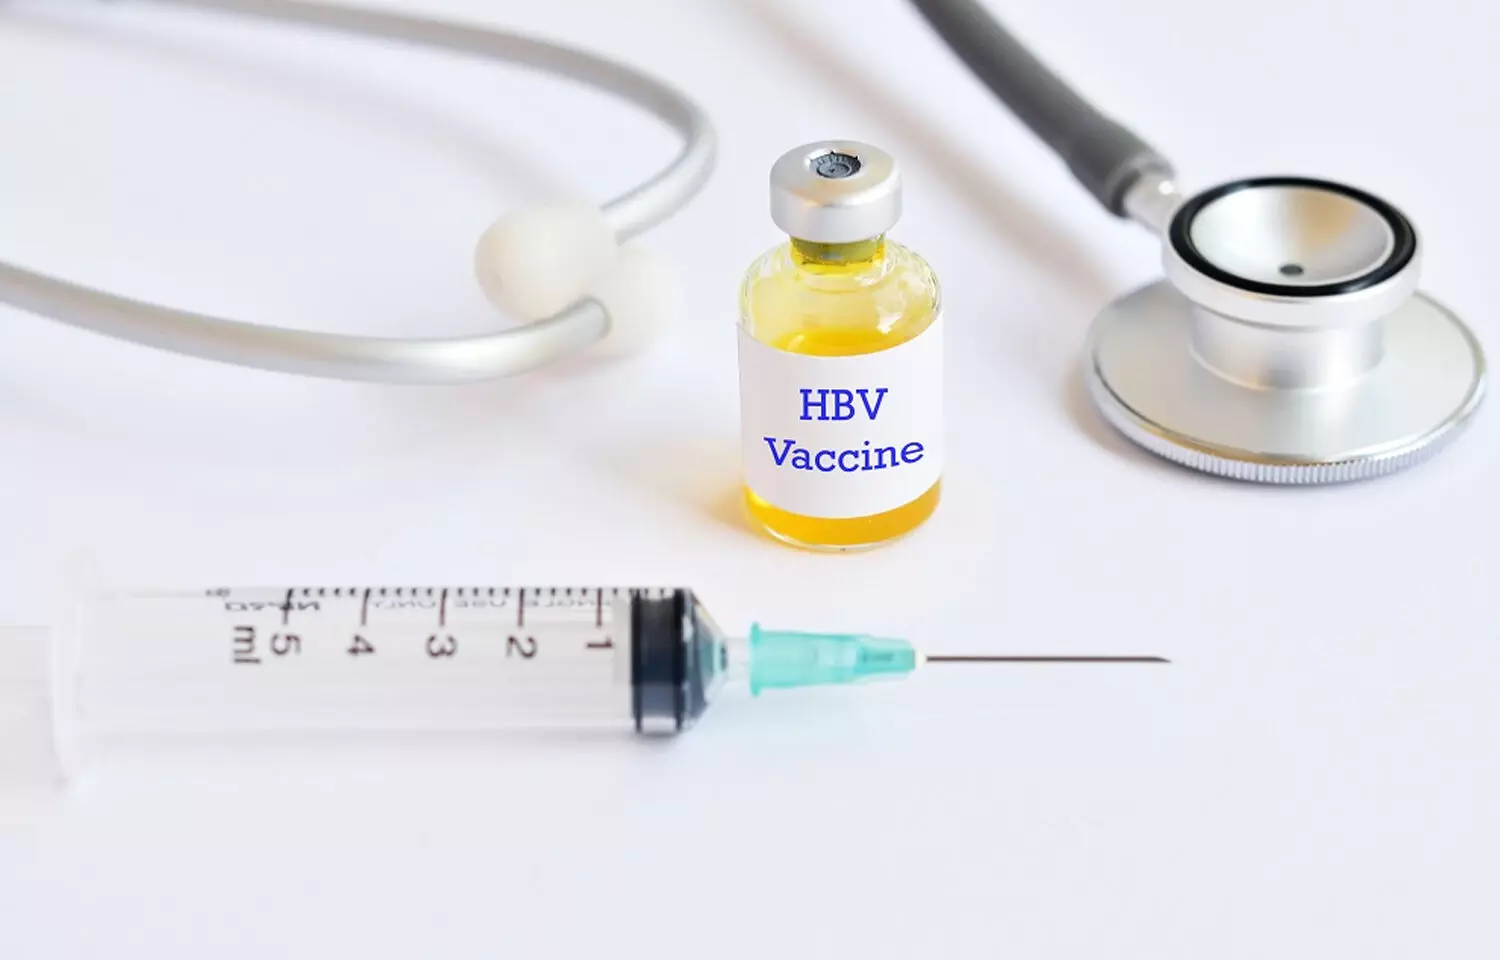 Give HBV booster vaccine at the earliest in thalassemic children, recommend Indian researchers